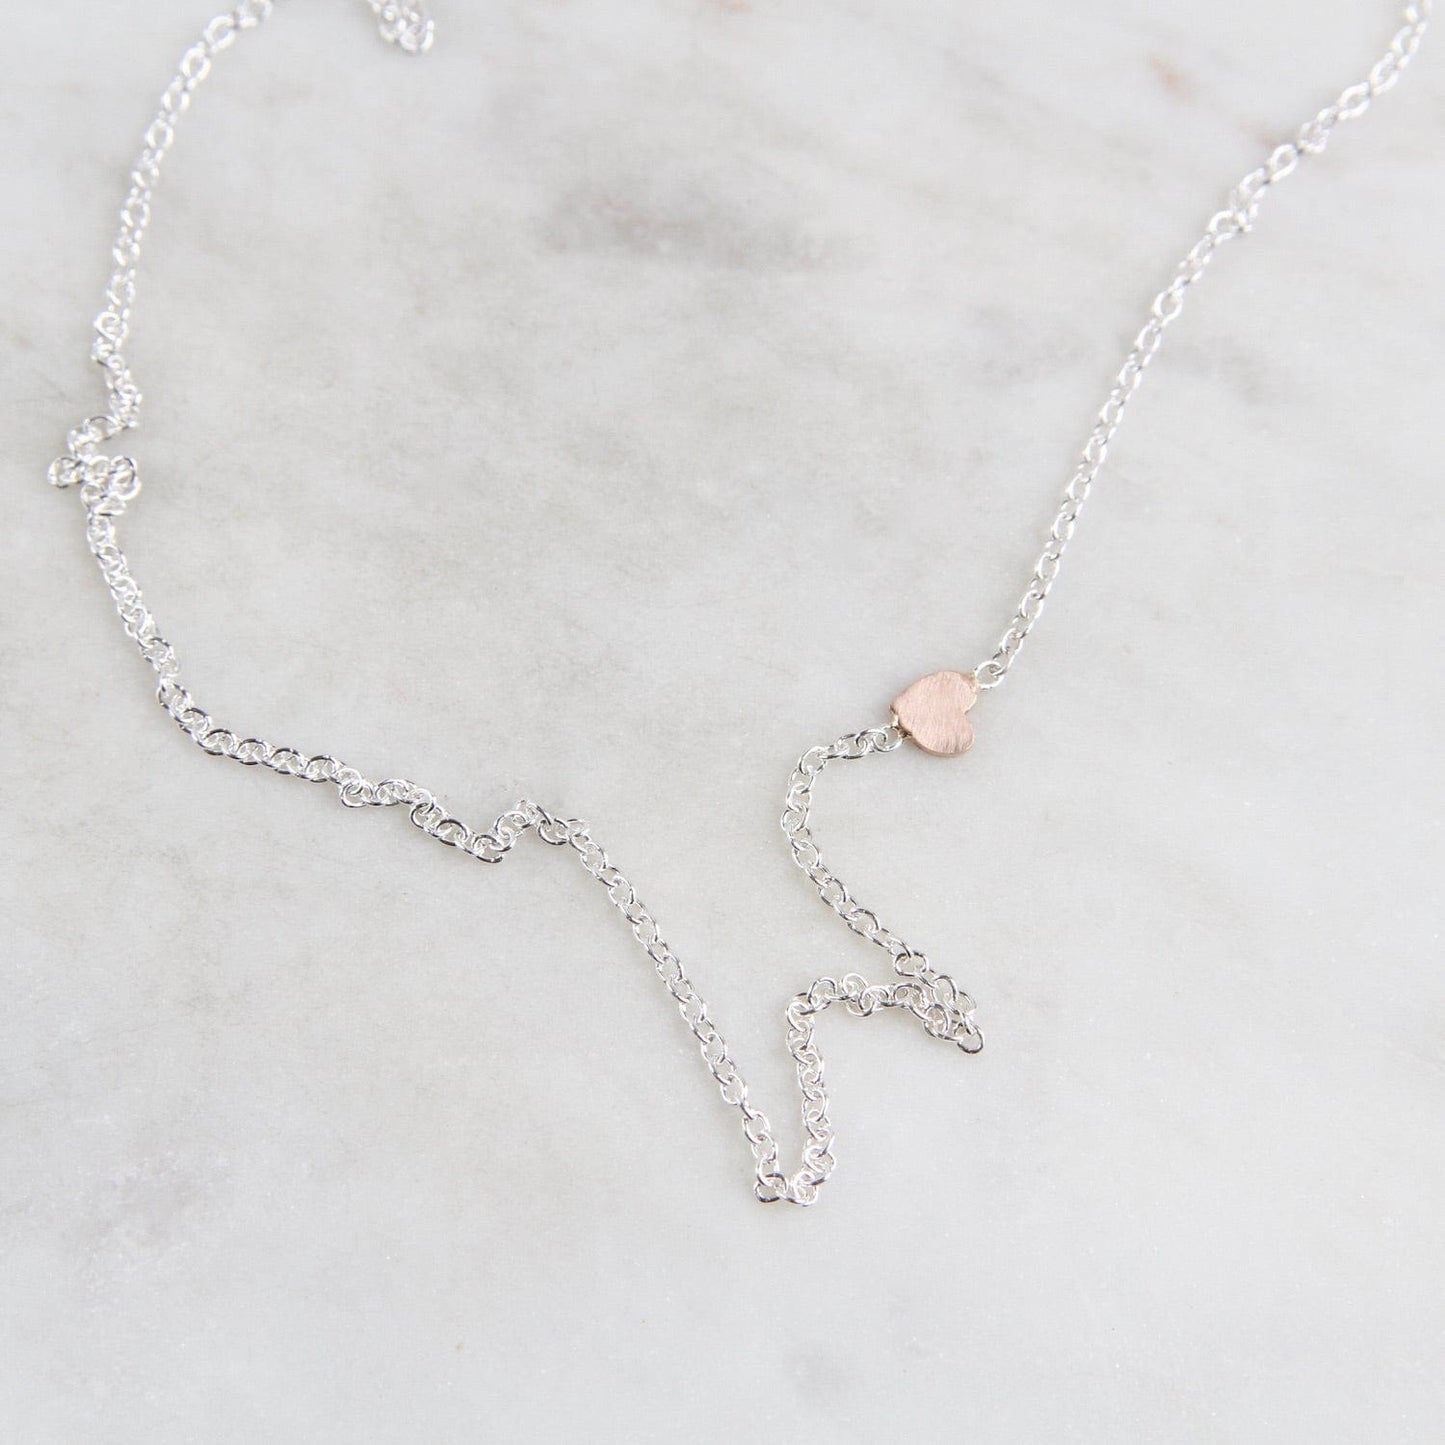 NKL Sterling Silver Chain with 14k Rose Gold Heart